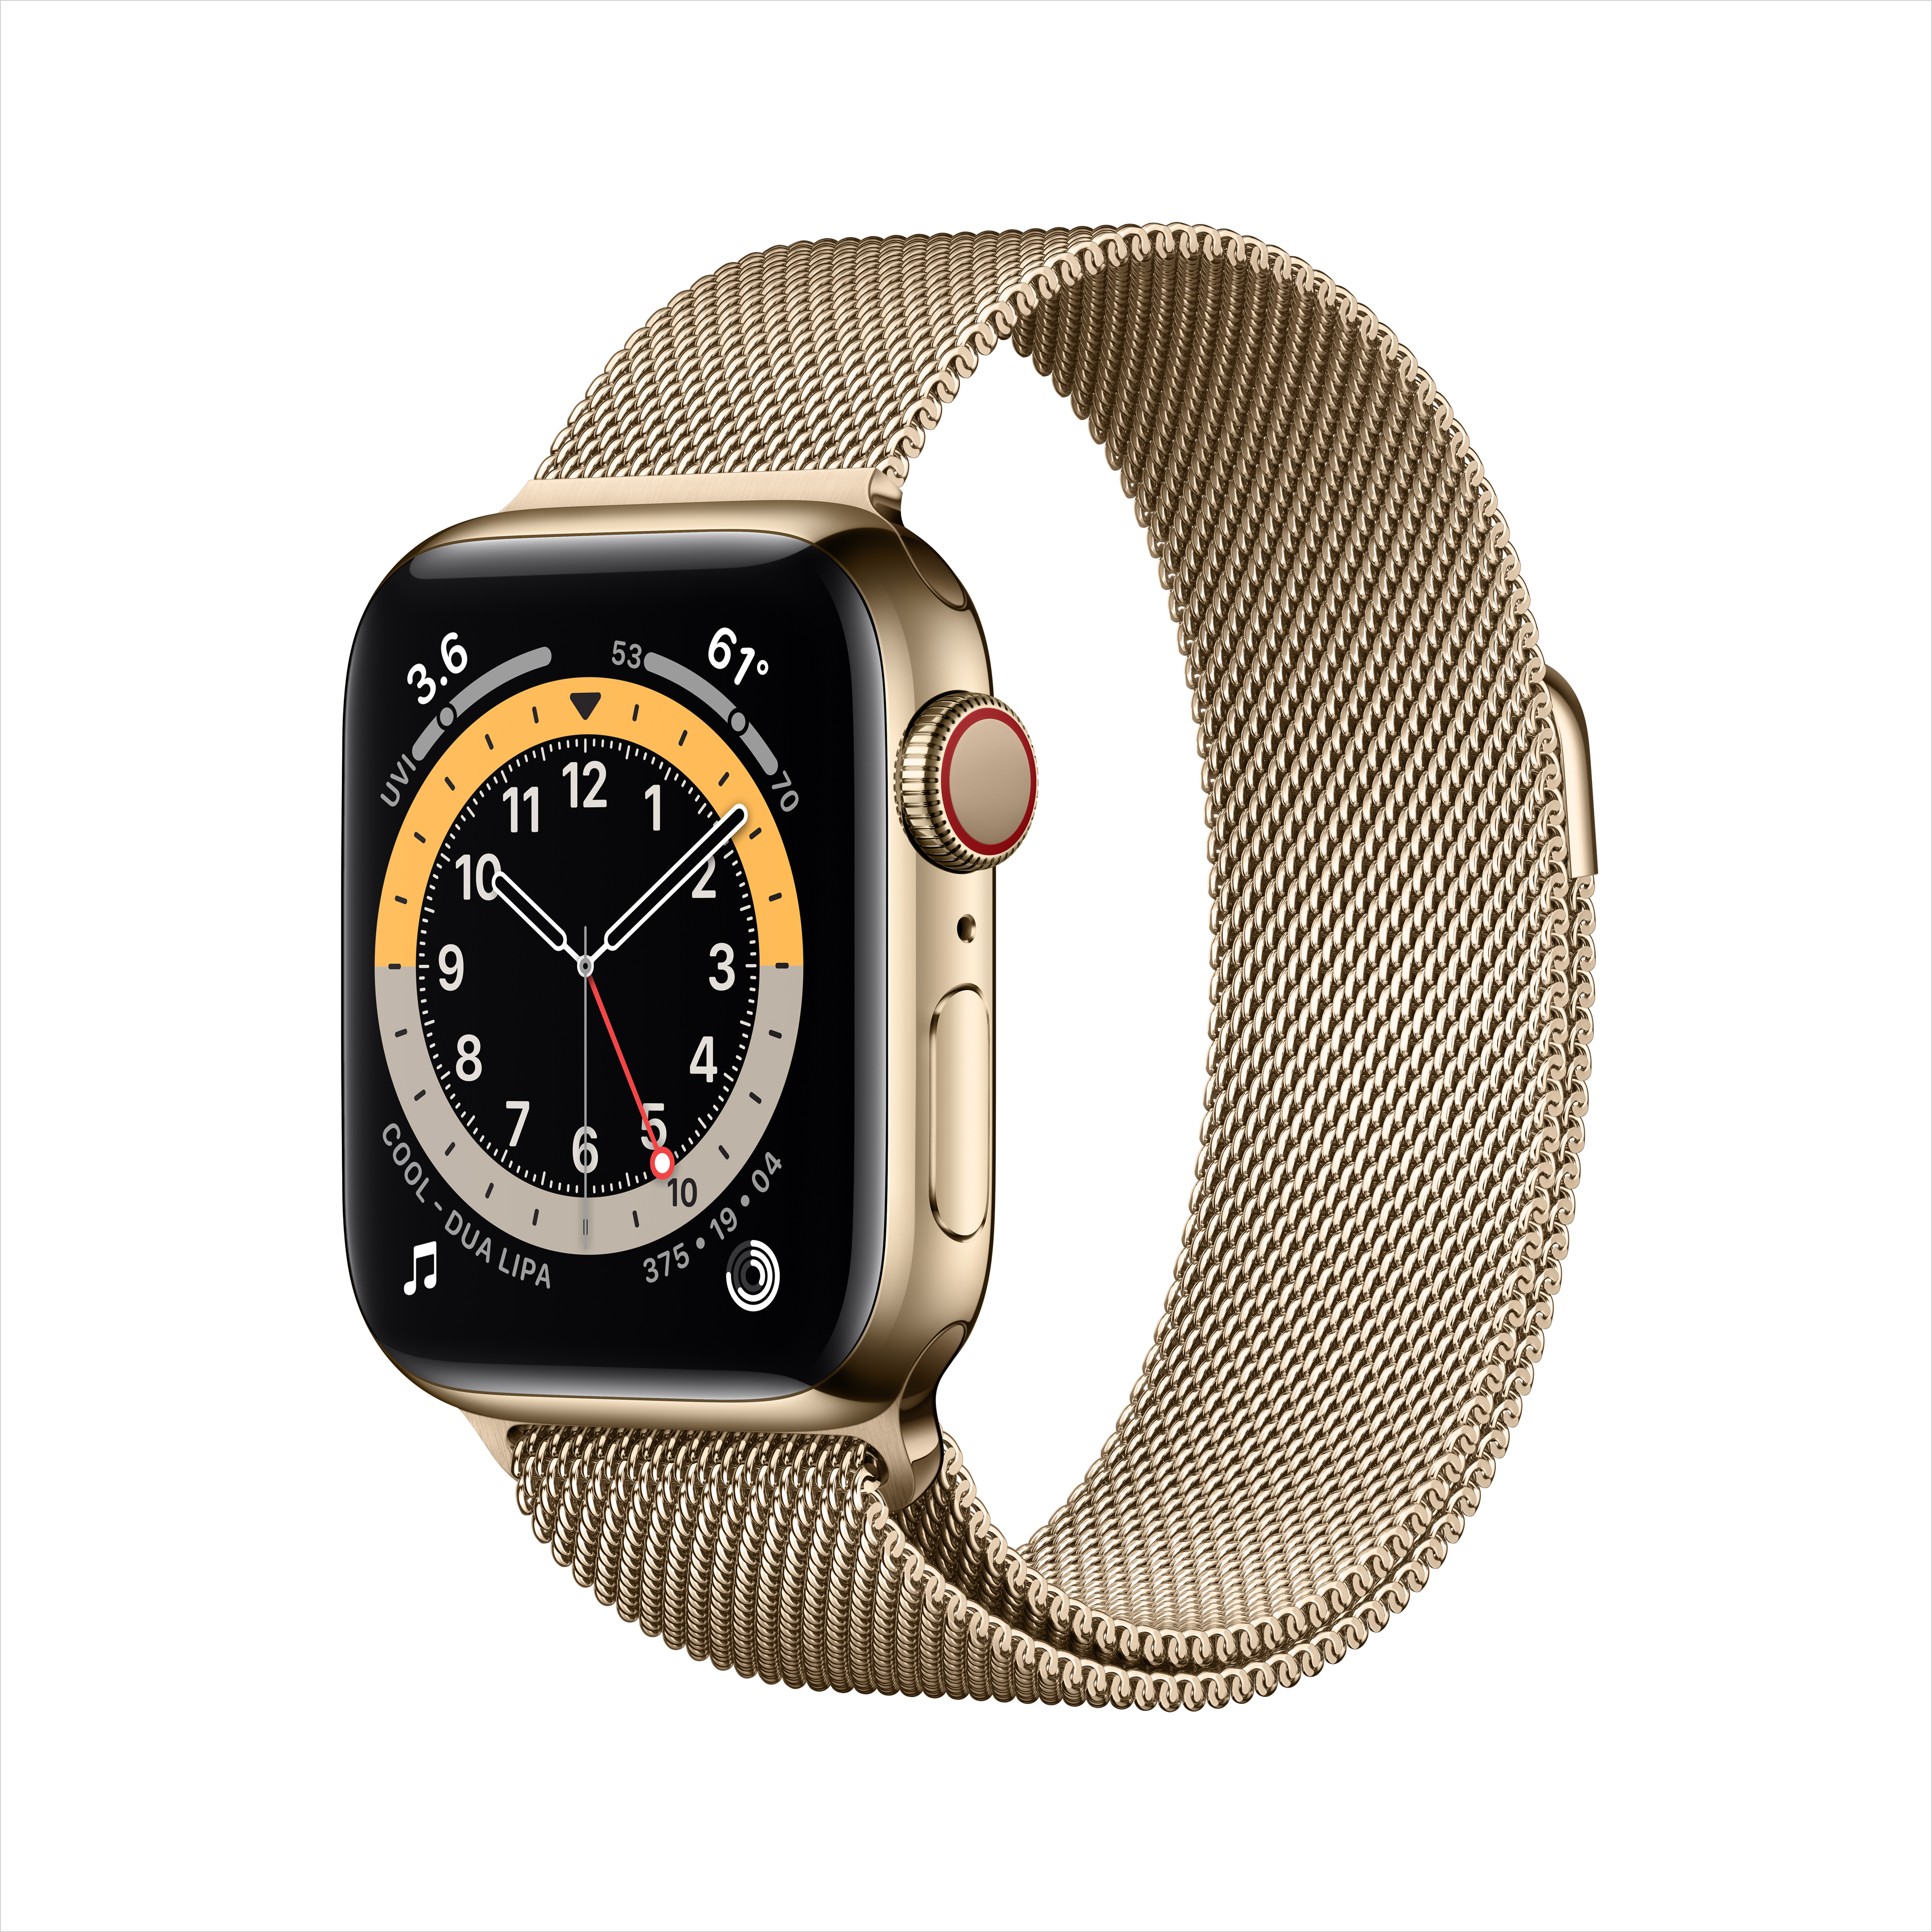 Apple Watch Series 6 GPS + Cellular, 40mm Gold Stainless Steel Case with  Gold Milanese Loop - Walmart.com